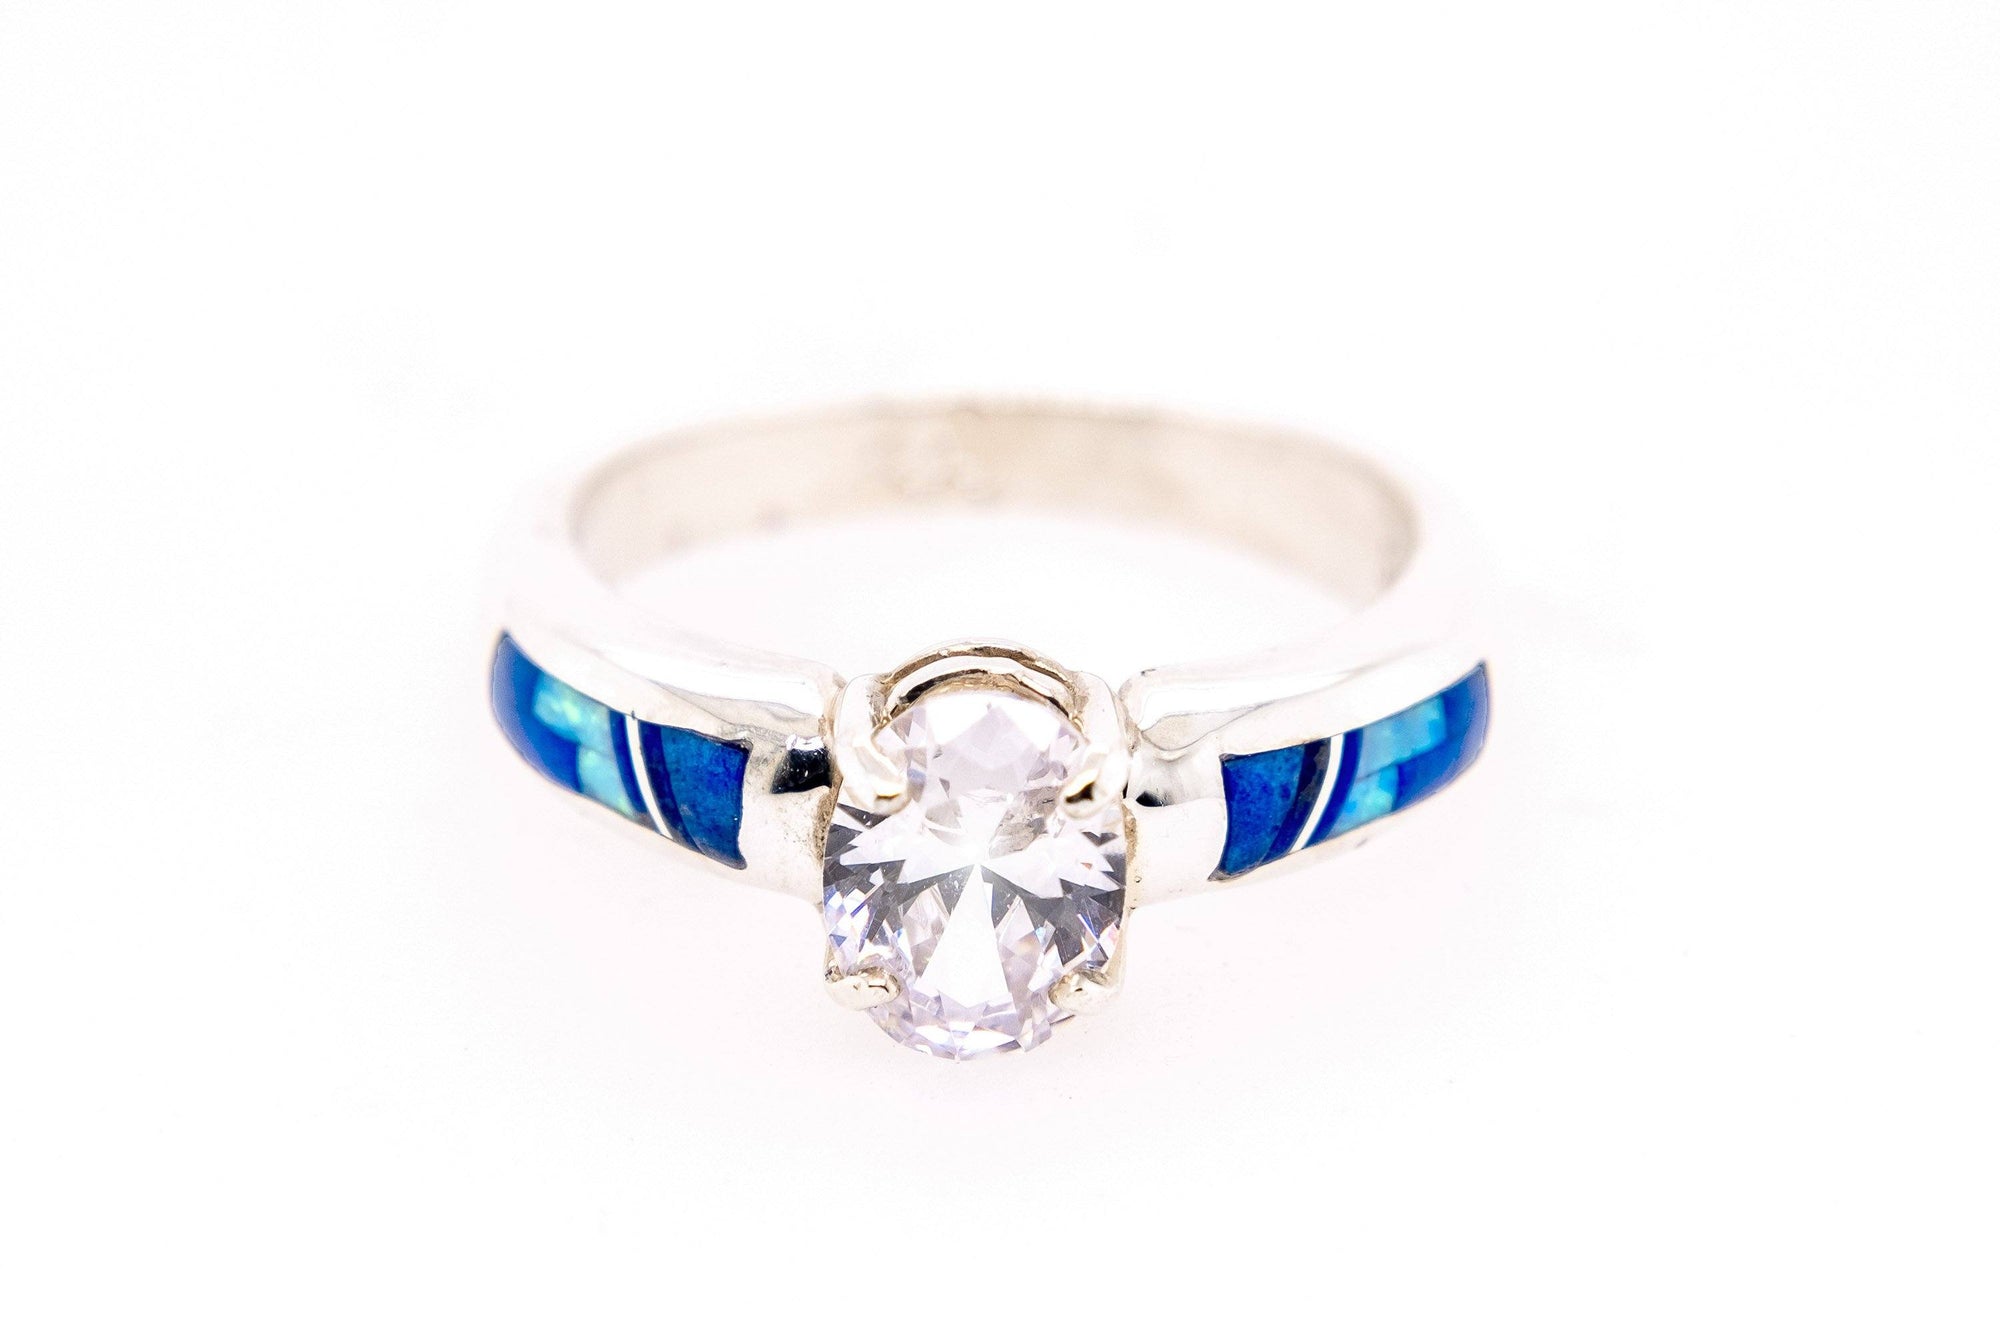 Dainty Blue Sky Ring by David Rosales - Front